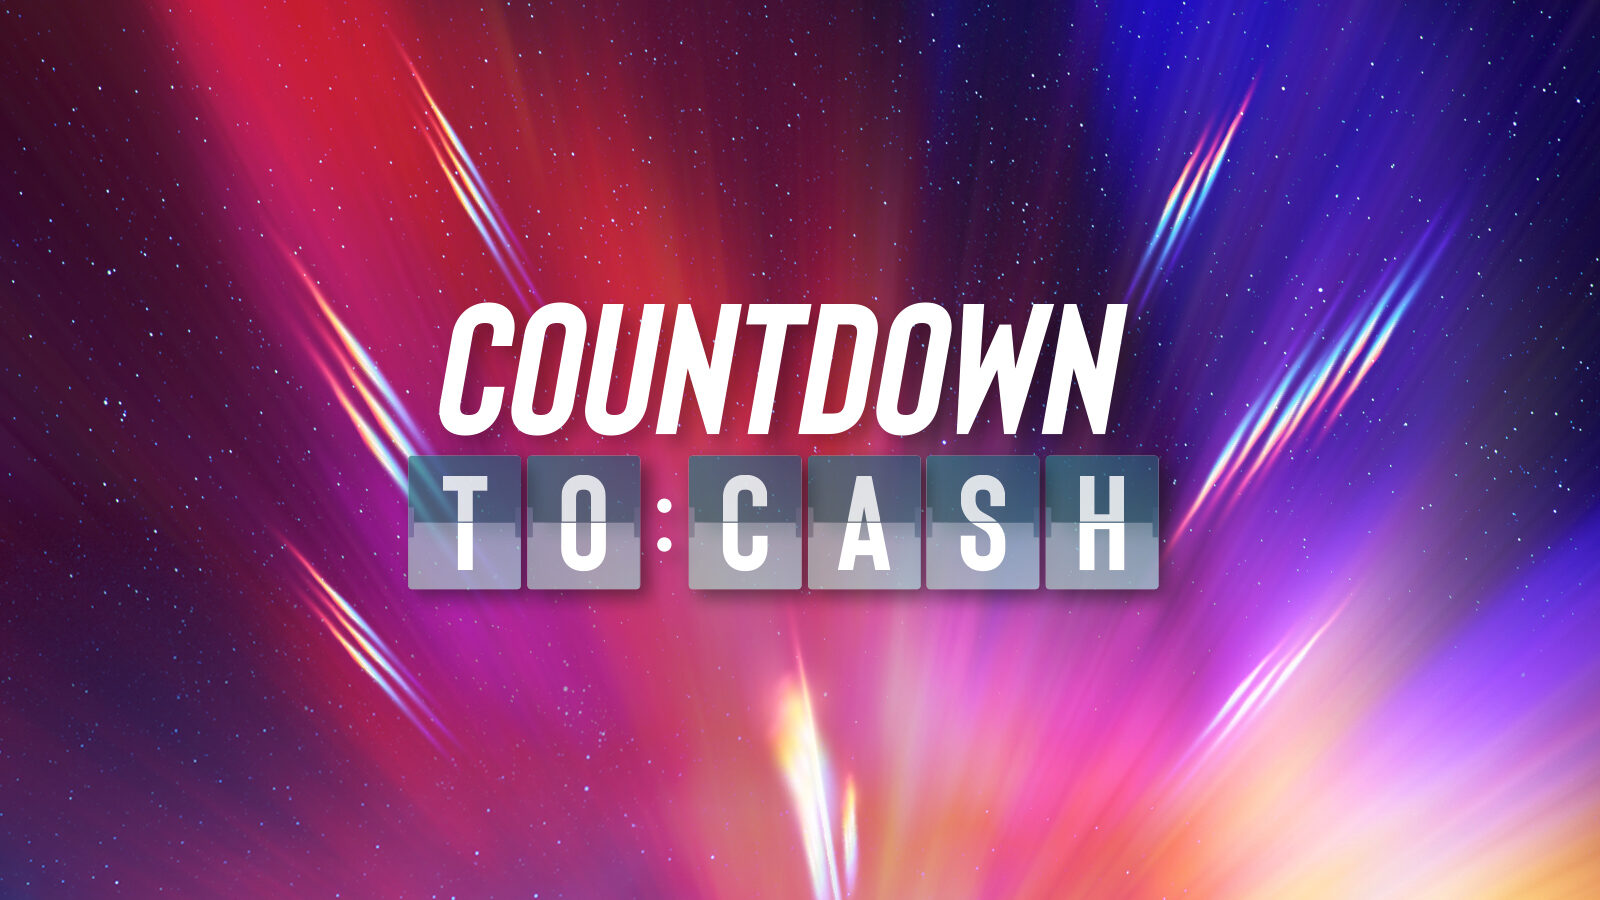 Countdown to Cash